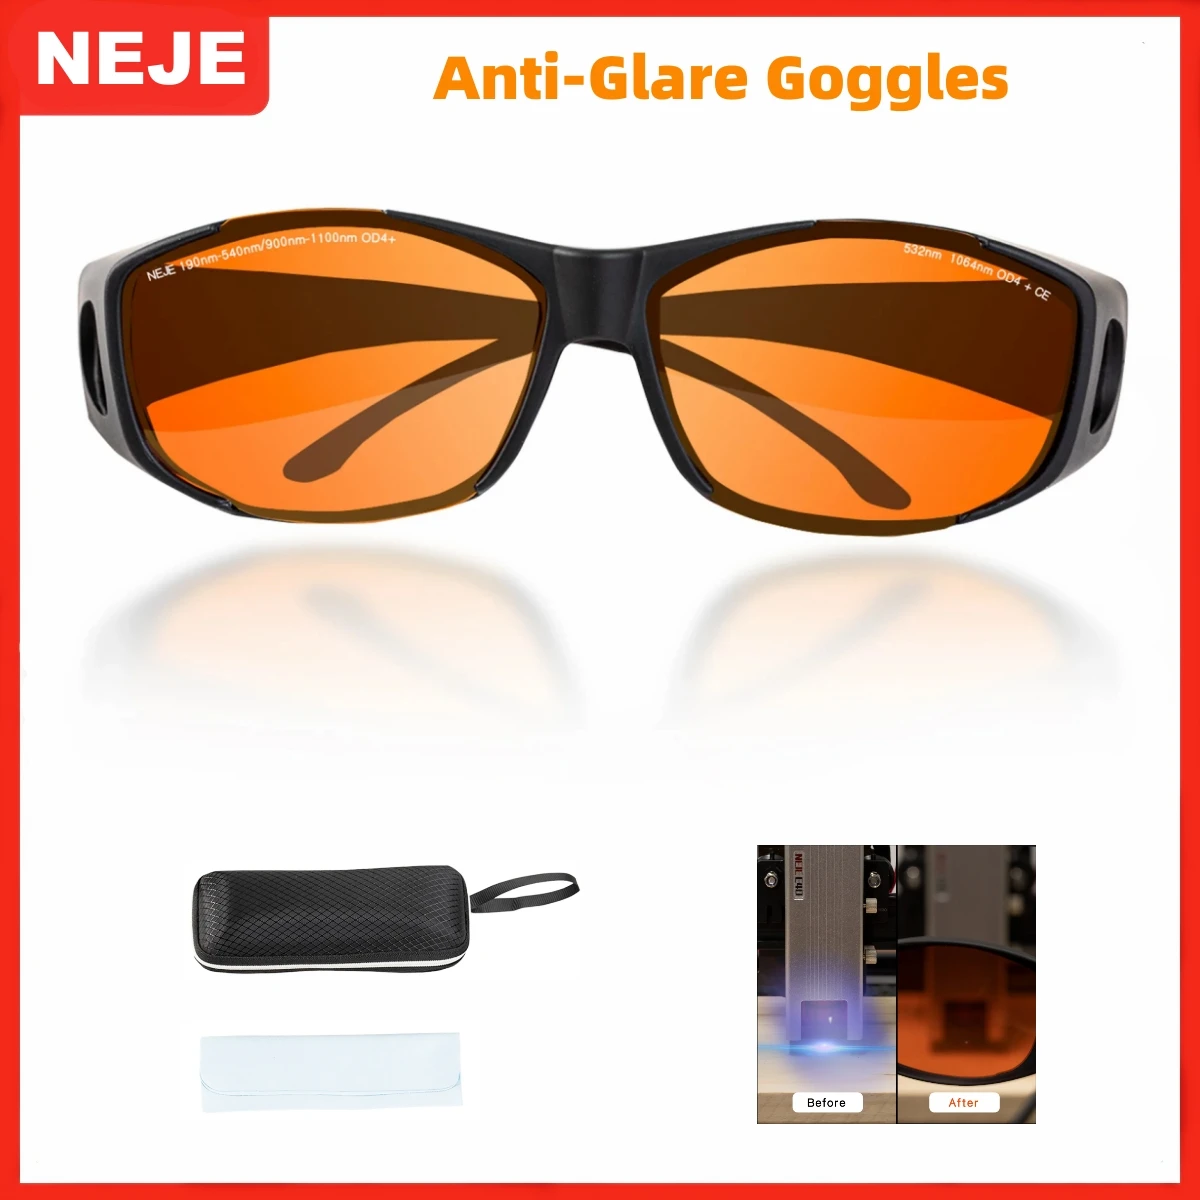 

NEJE Anti-Glare Goggles Laser Protection Goggles190nm-540nm/900nm-1100nm Wavelength UV/Purple and Blue Laser Safety Glasses